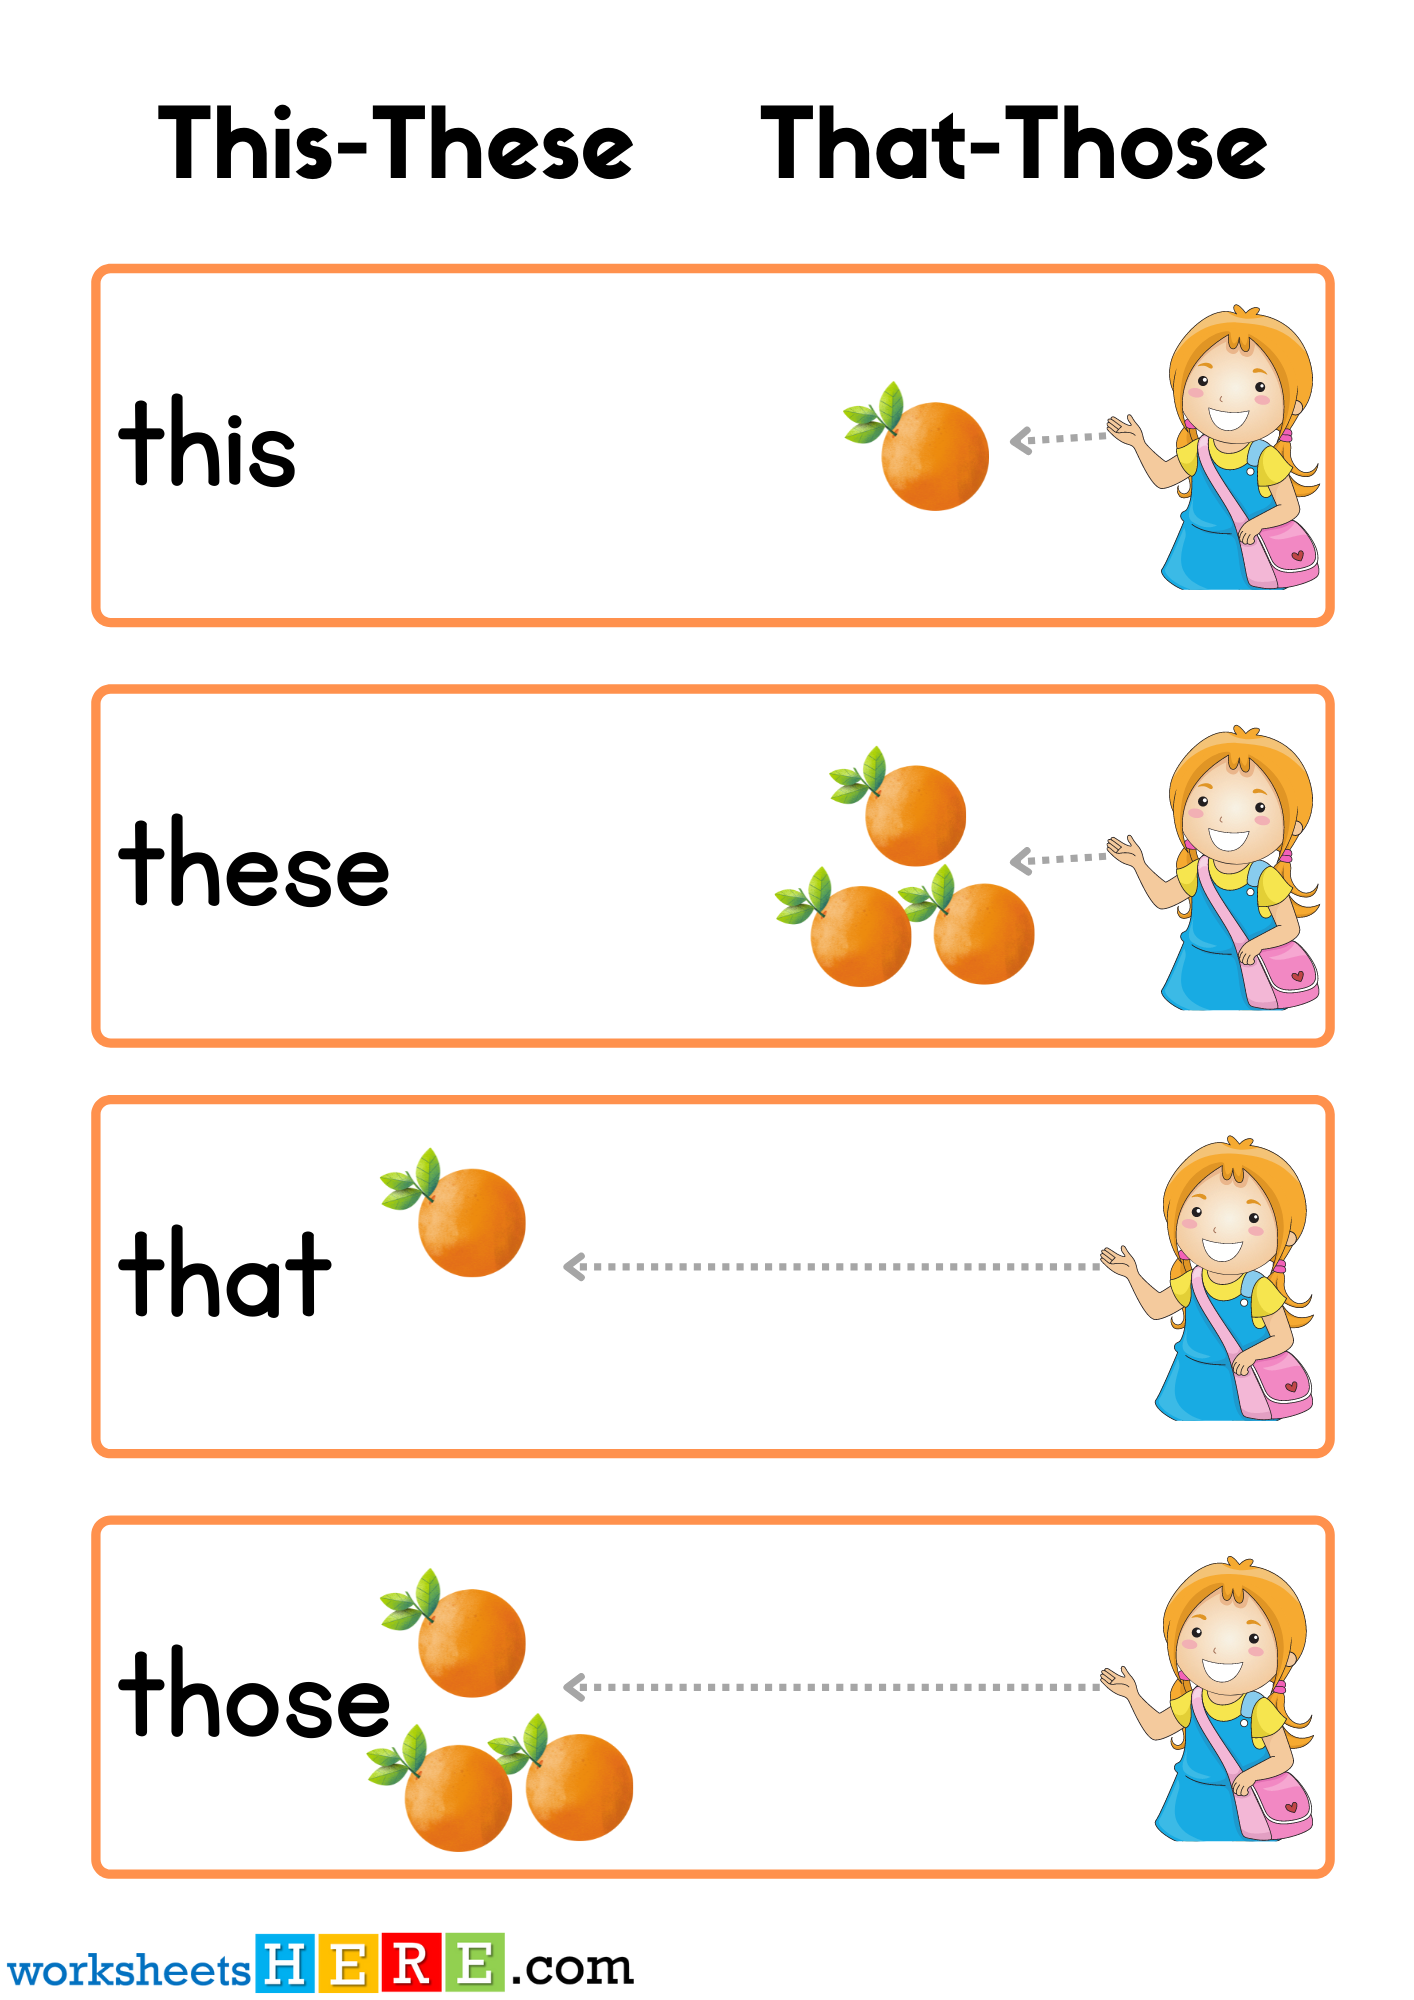 This, These, That, Those Examples with Pictures PDF Worksheet For Kids